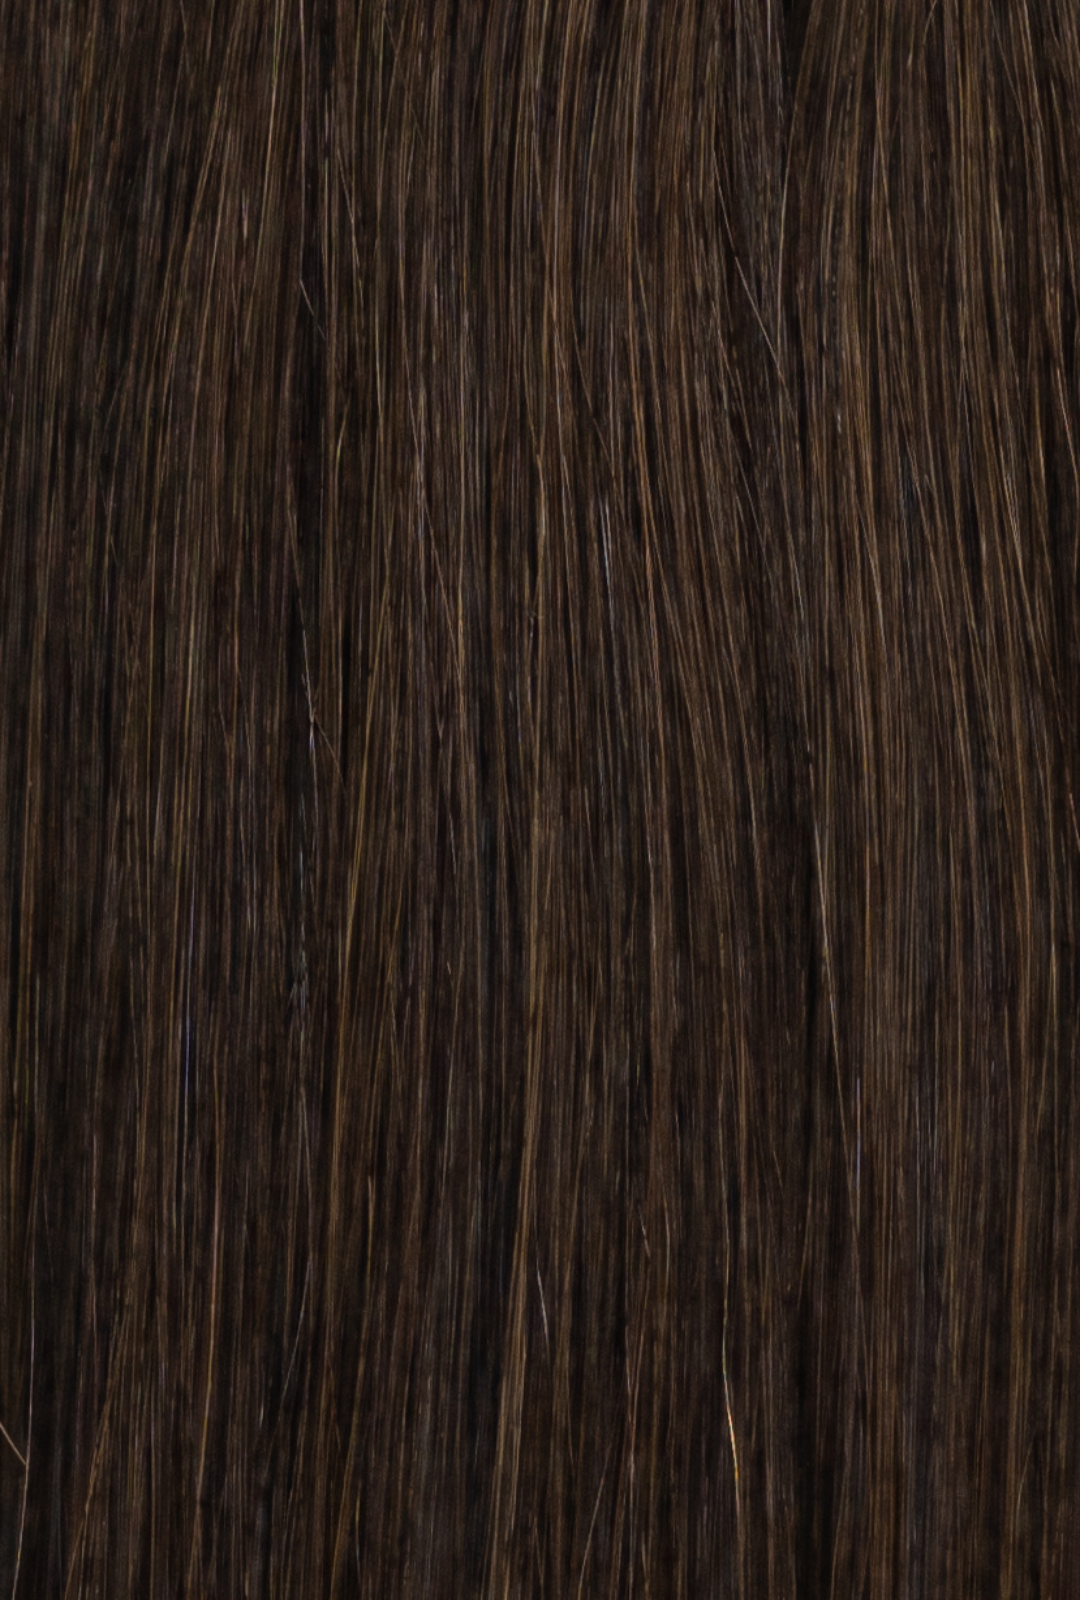 Laced Hair Keratin Bond Extensions #2 (Chocolate)